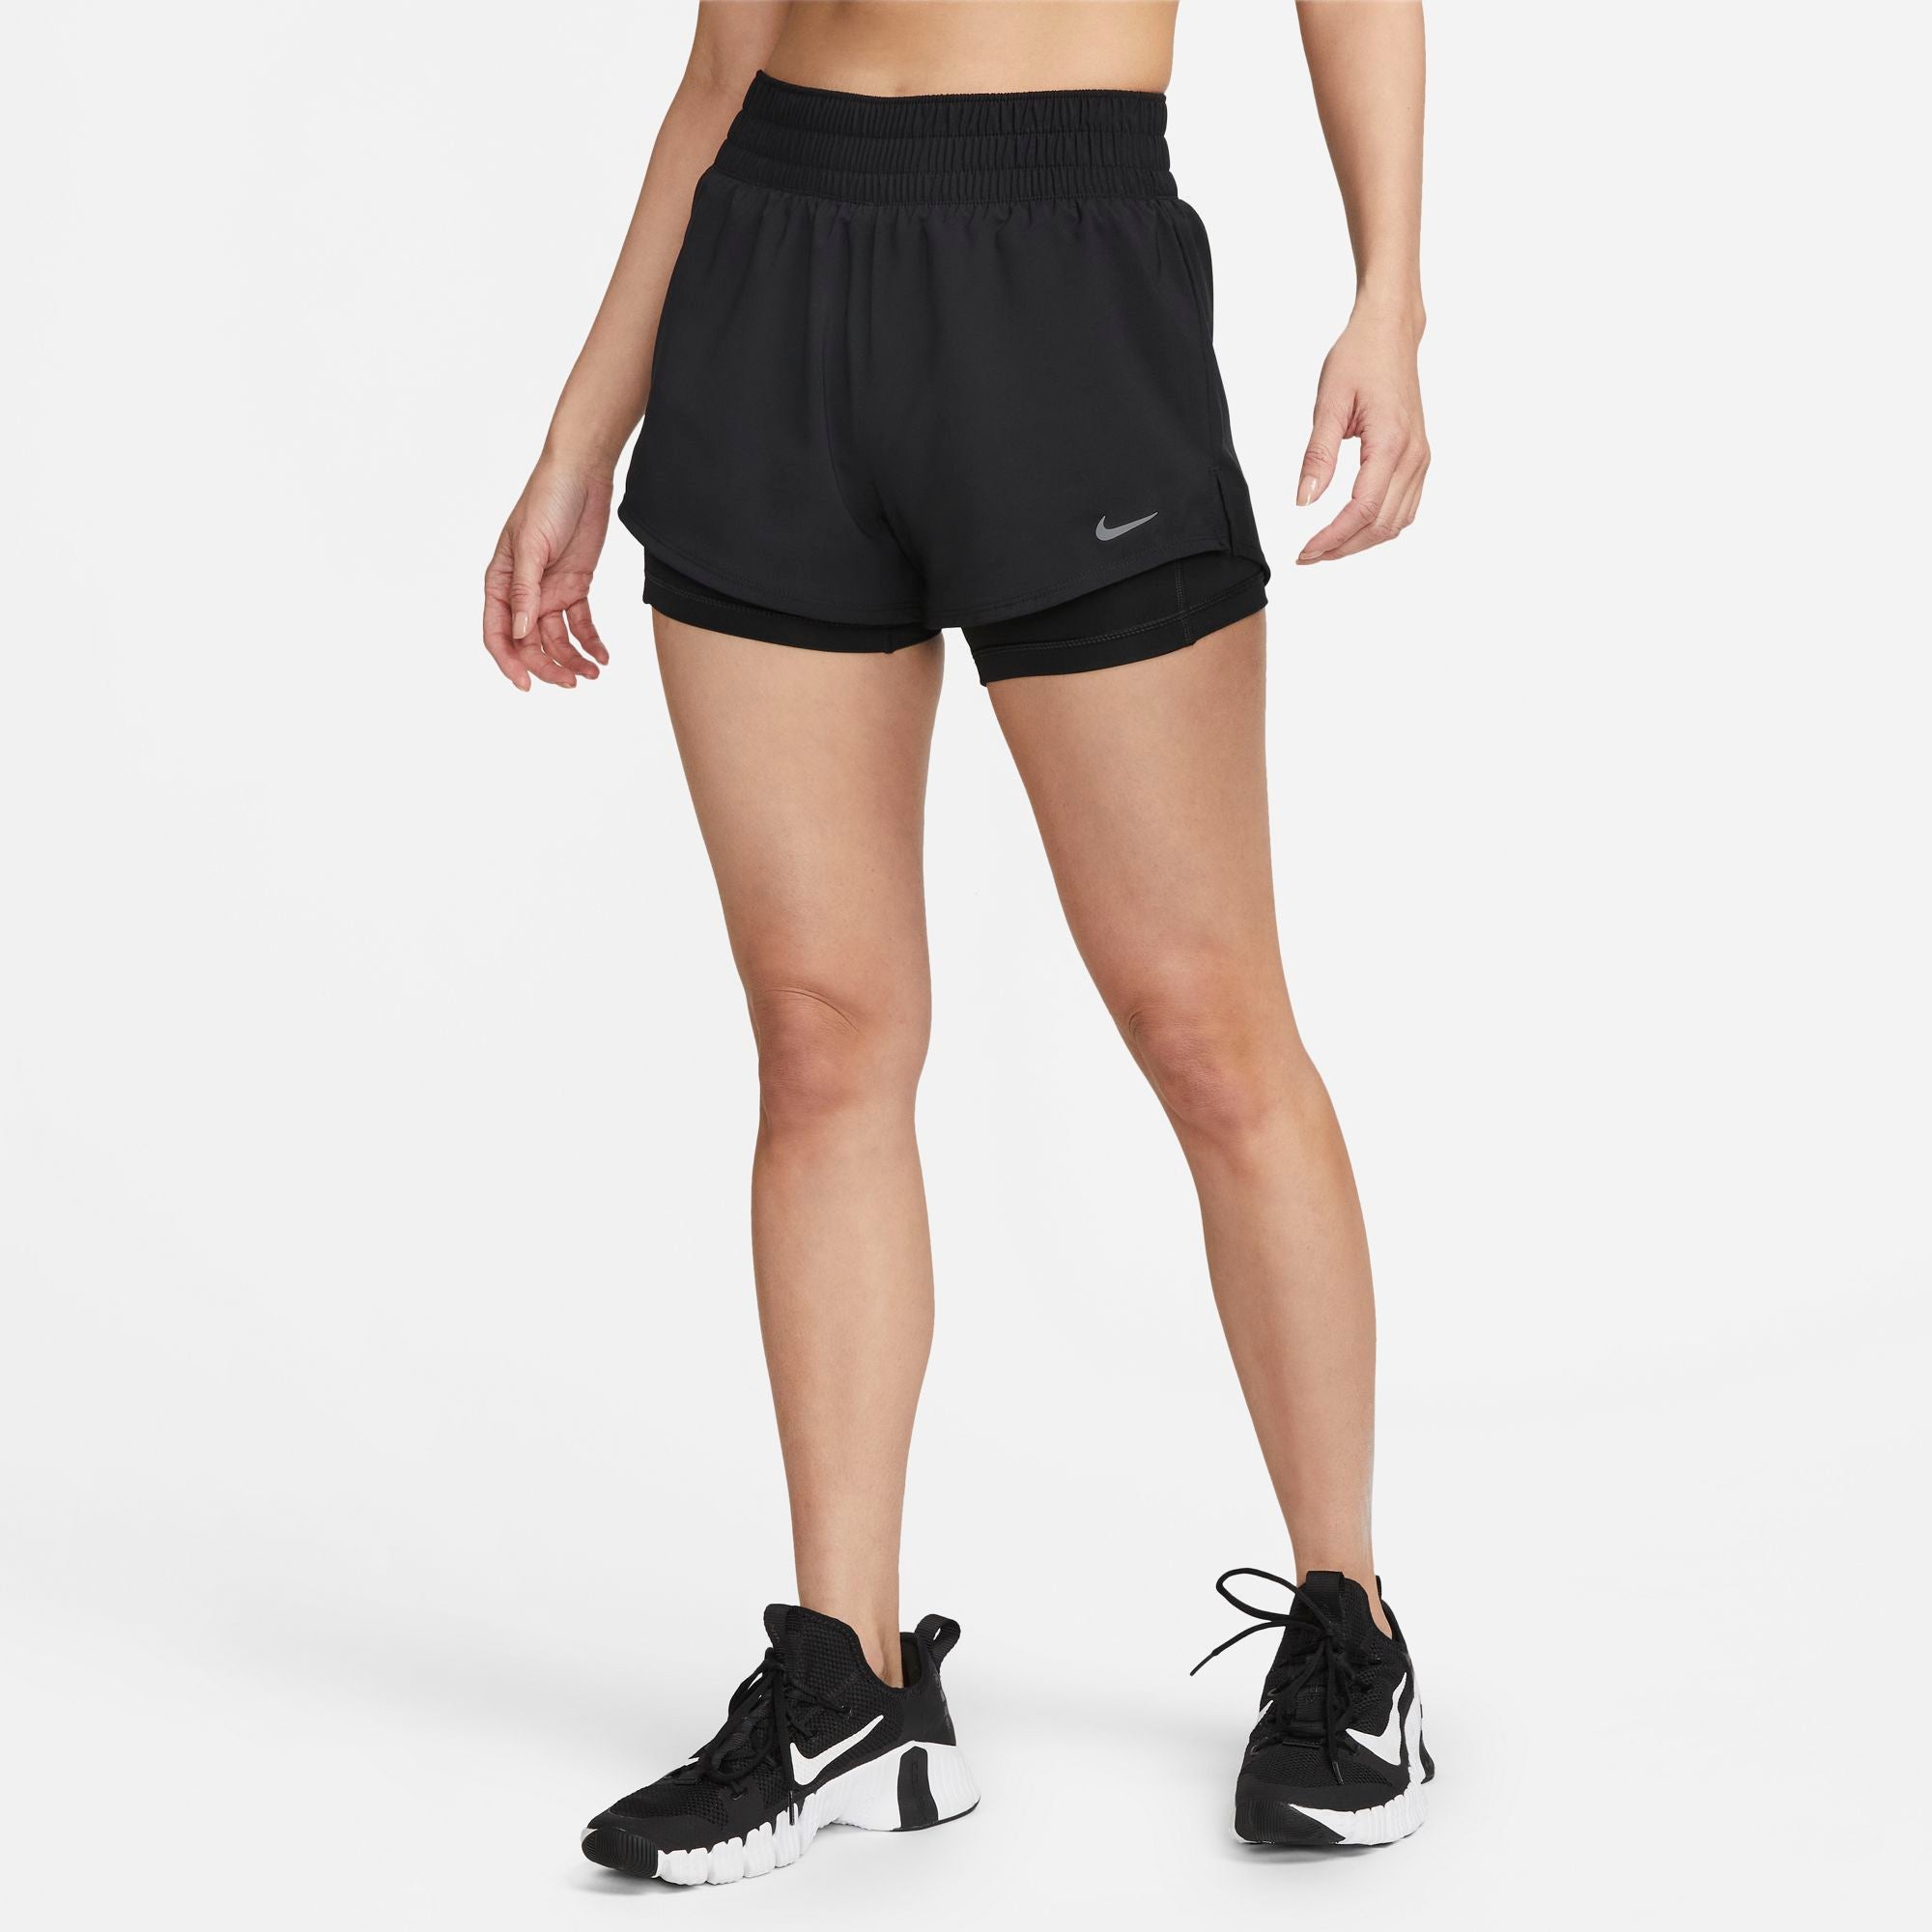 NIKE DRI-FIT ONE WOMENS MID-RISE  3" 2-IN-1 SHORTS